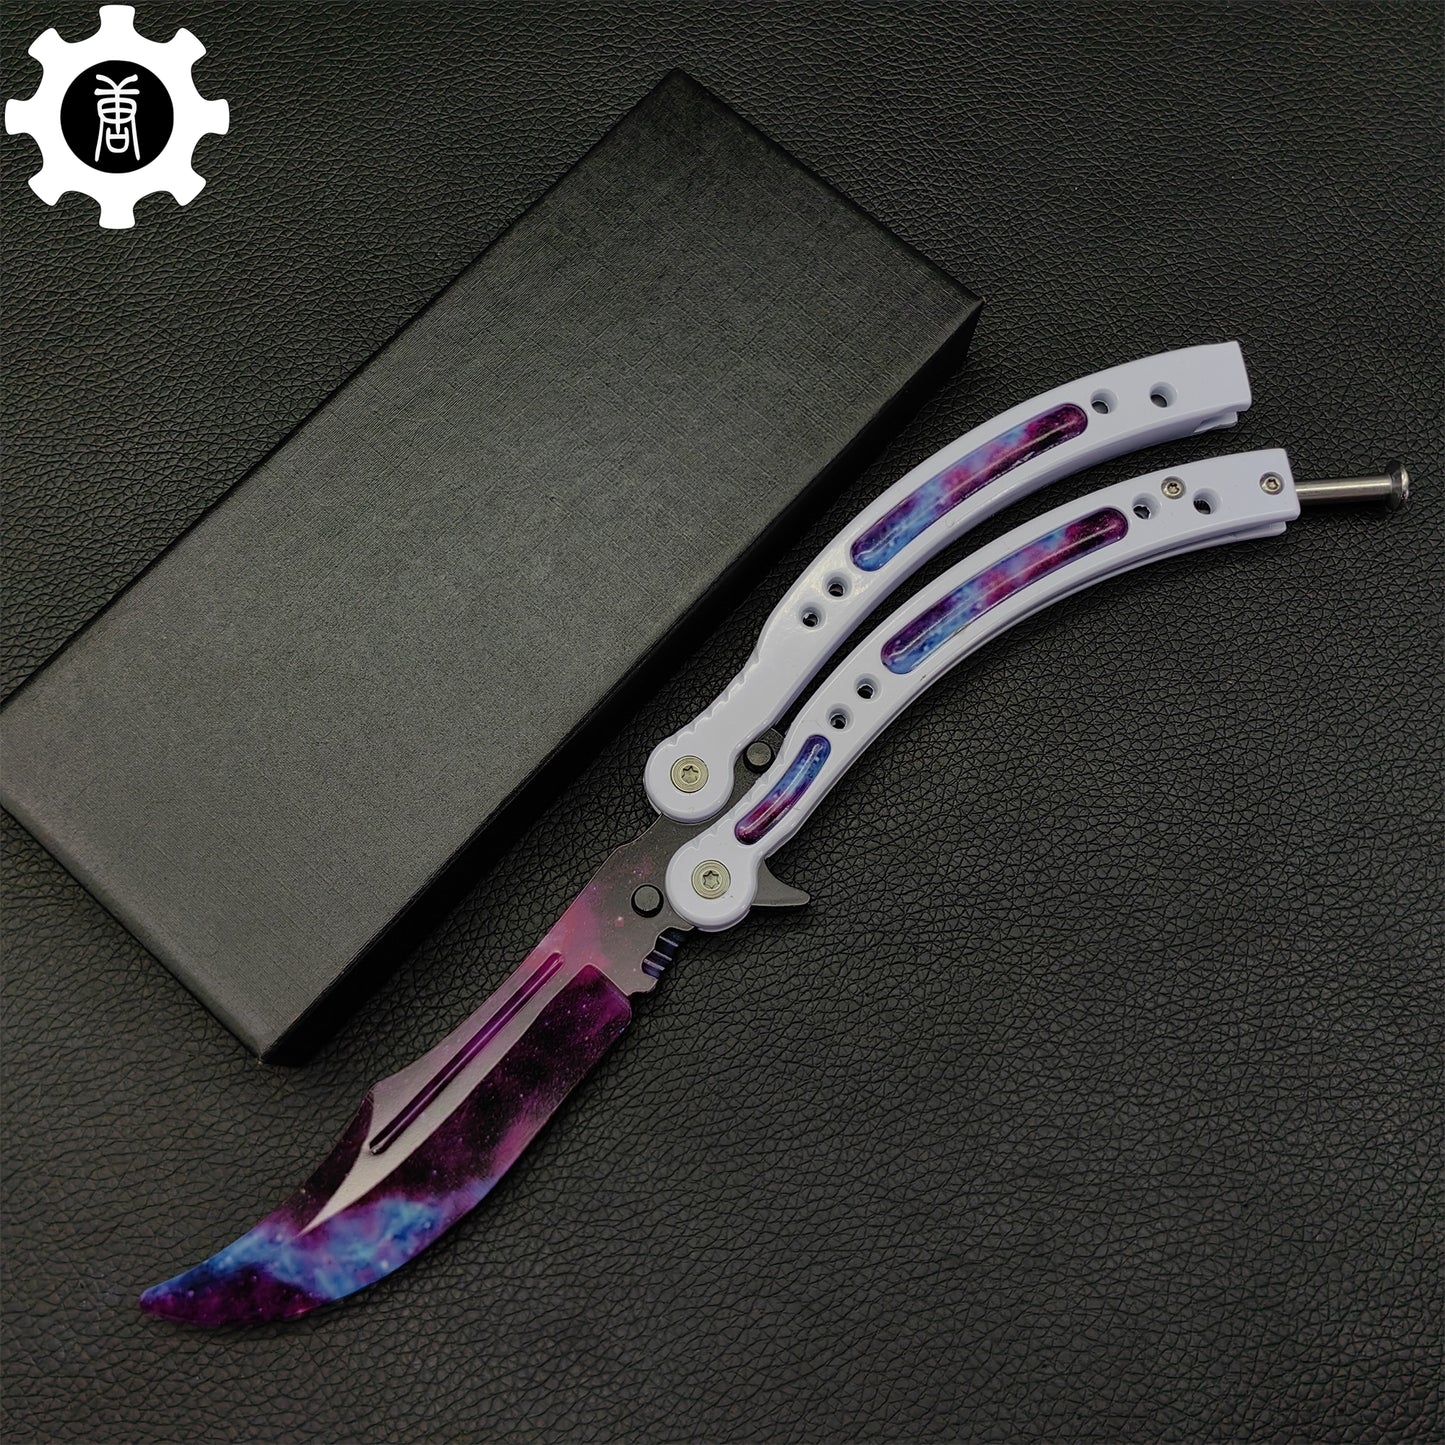 Galaxy Butterfly Knife White Handle Metal Balisong Trainer